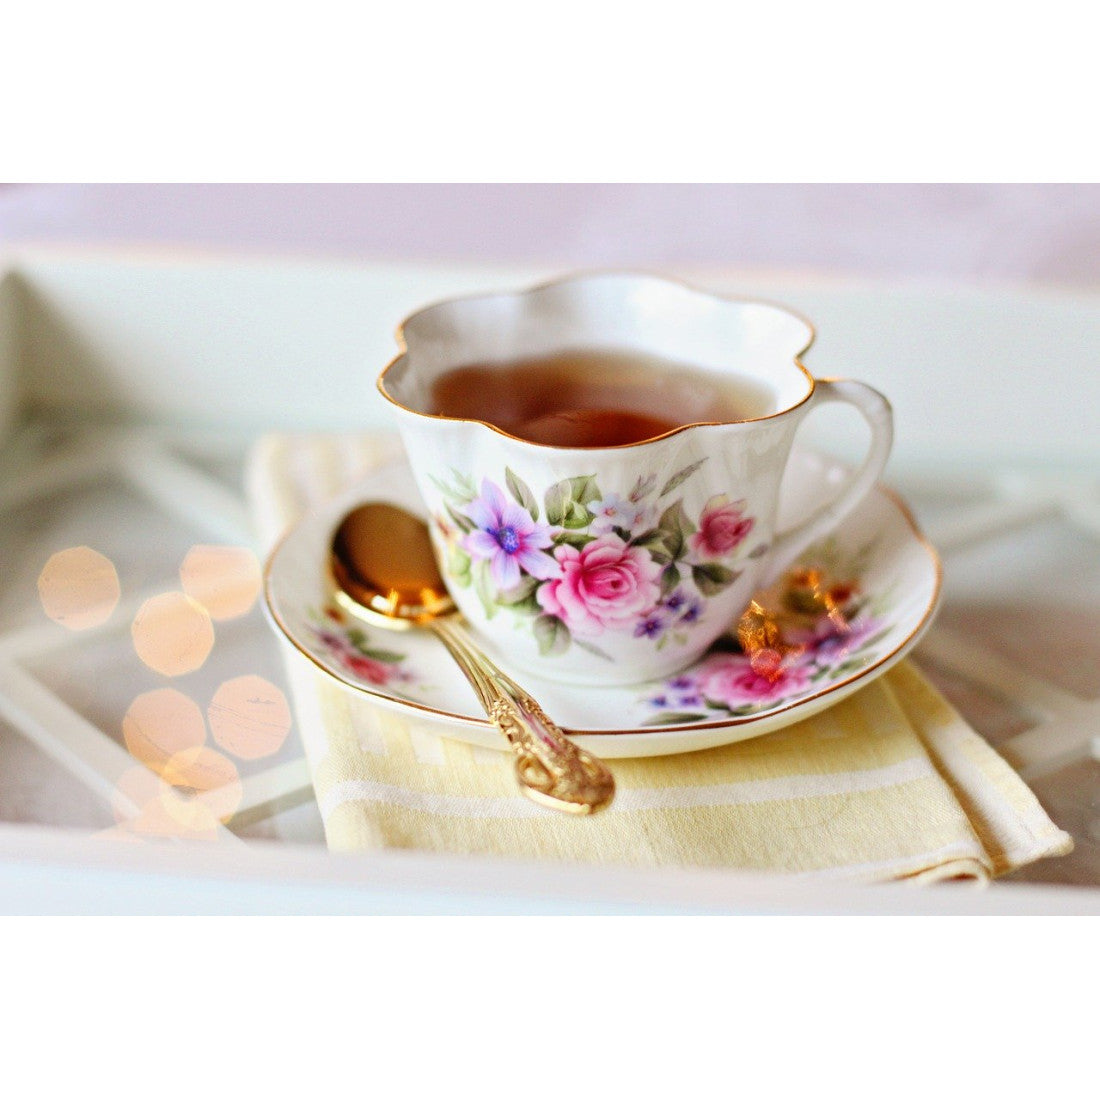 GanoCelebrate Rooibos tea in a pretty fluted china cup and saucer with bright colored flowers as decoration. A gold colored tea spoon rests on the saucer, and all sits on a beige linen napkin. A tea for the most sophisticated occasion.